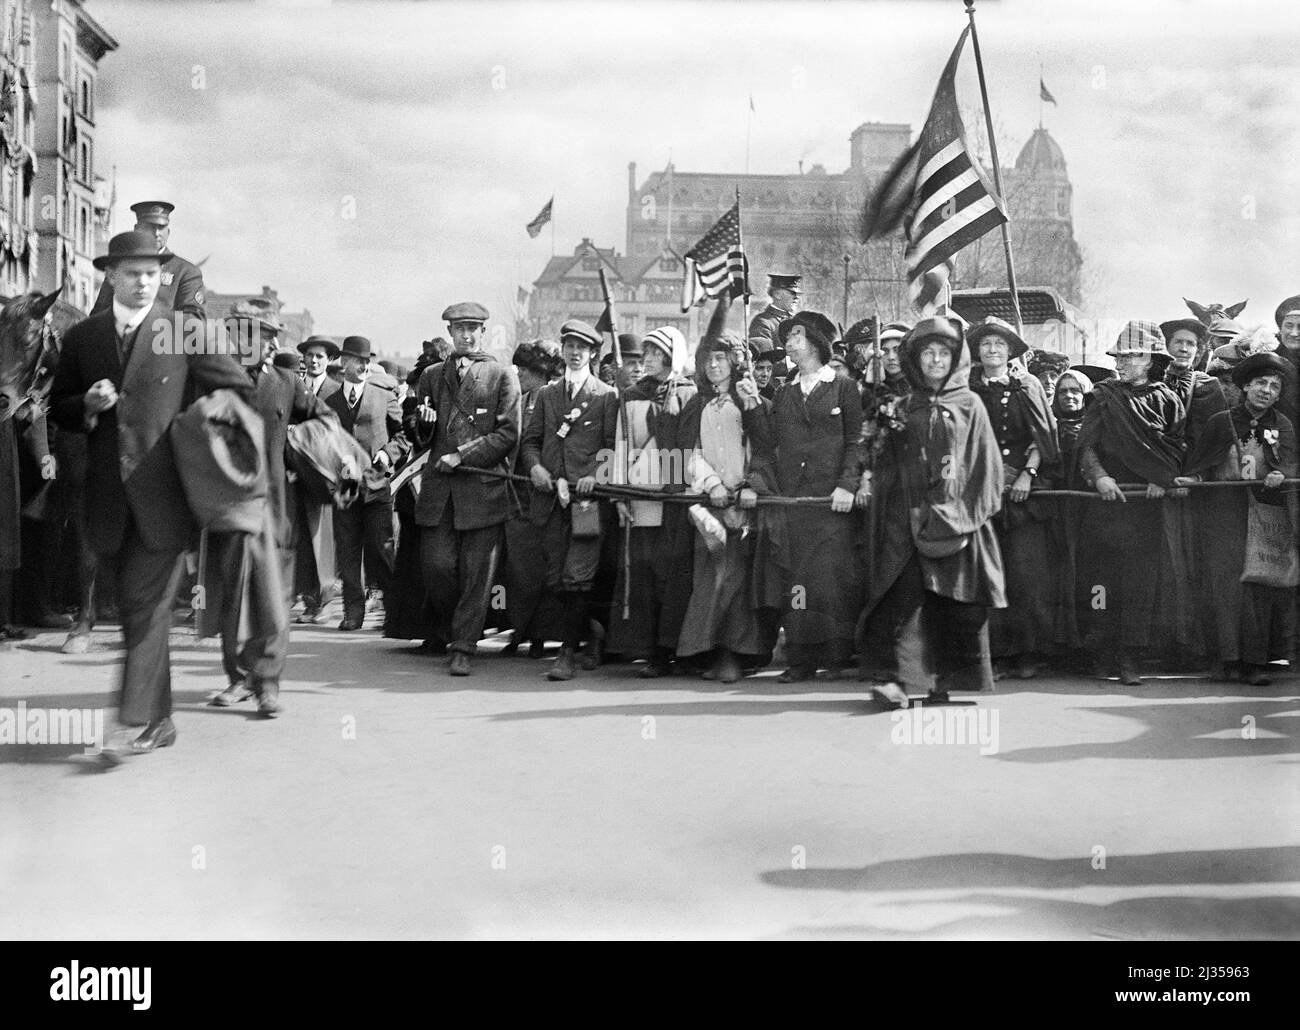 New York Suffragettes Marching in Parade, Washington, D.C., USA, Harris & Ewing, 1913 Stockfoto